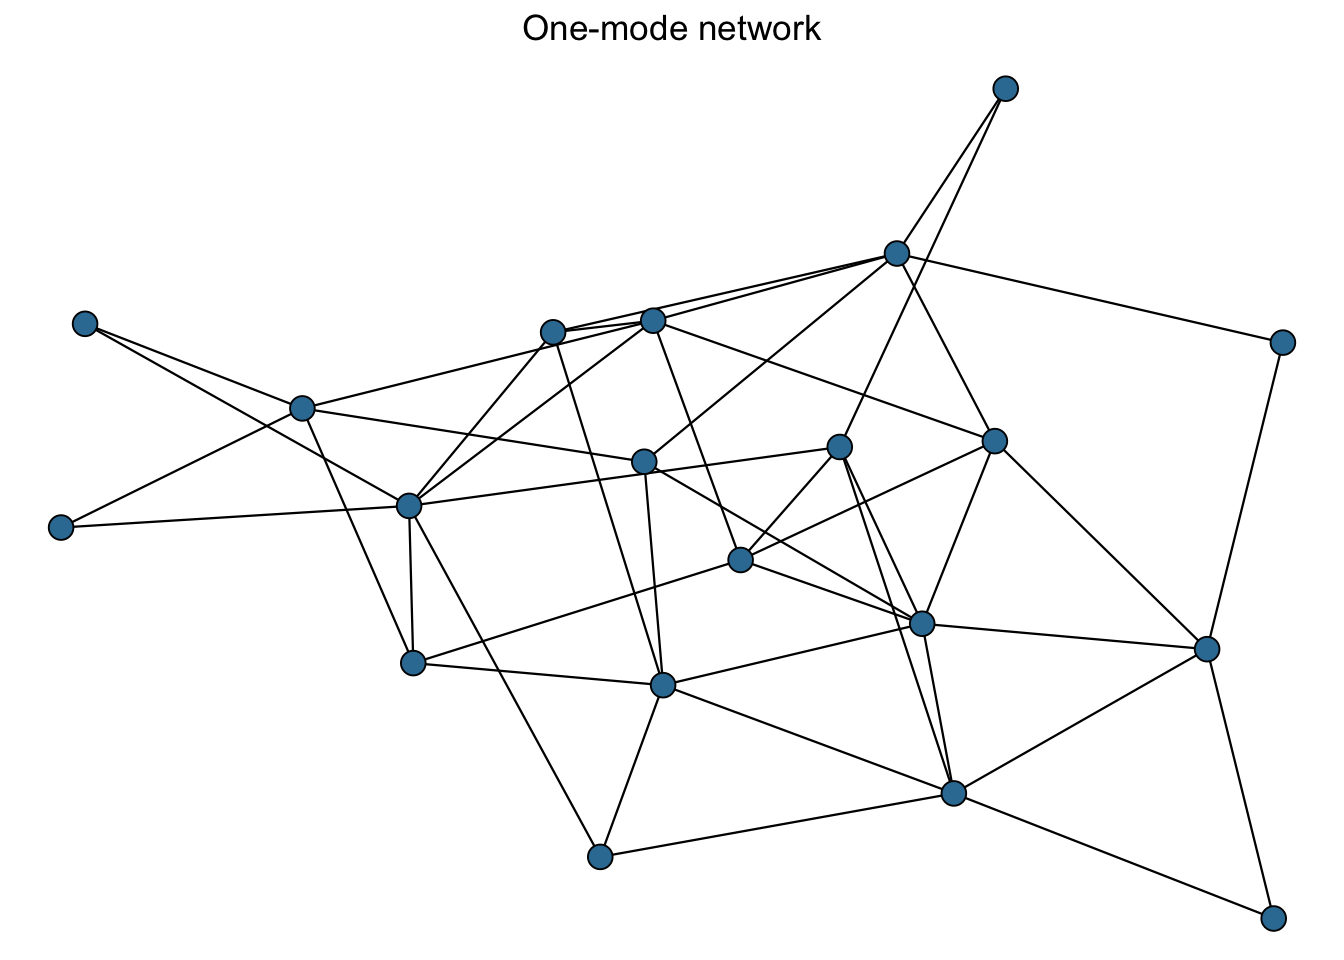 Two types of networks